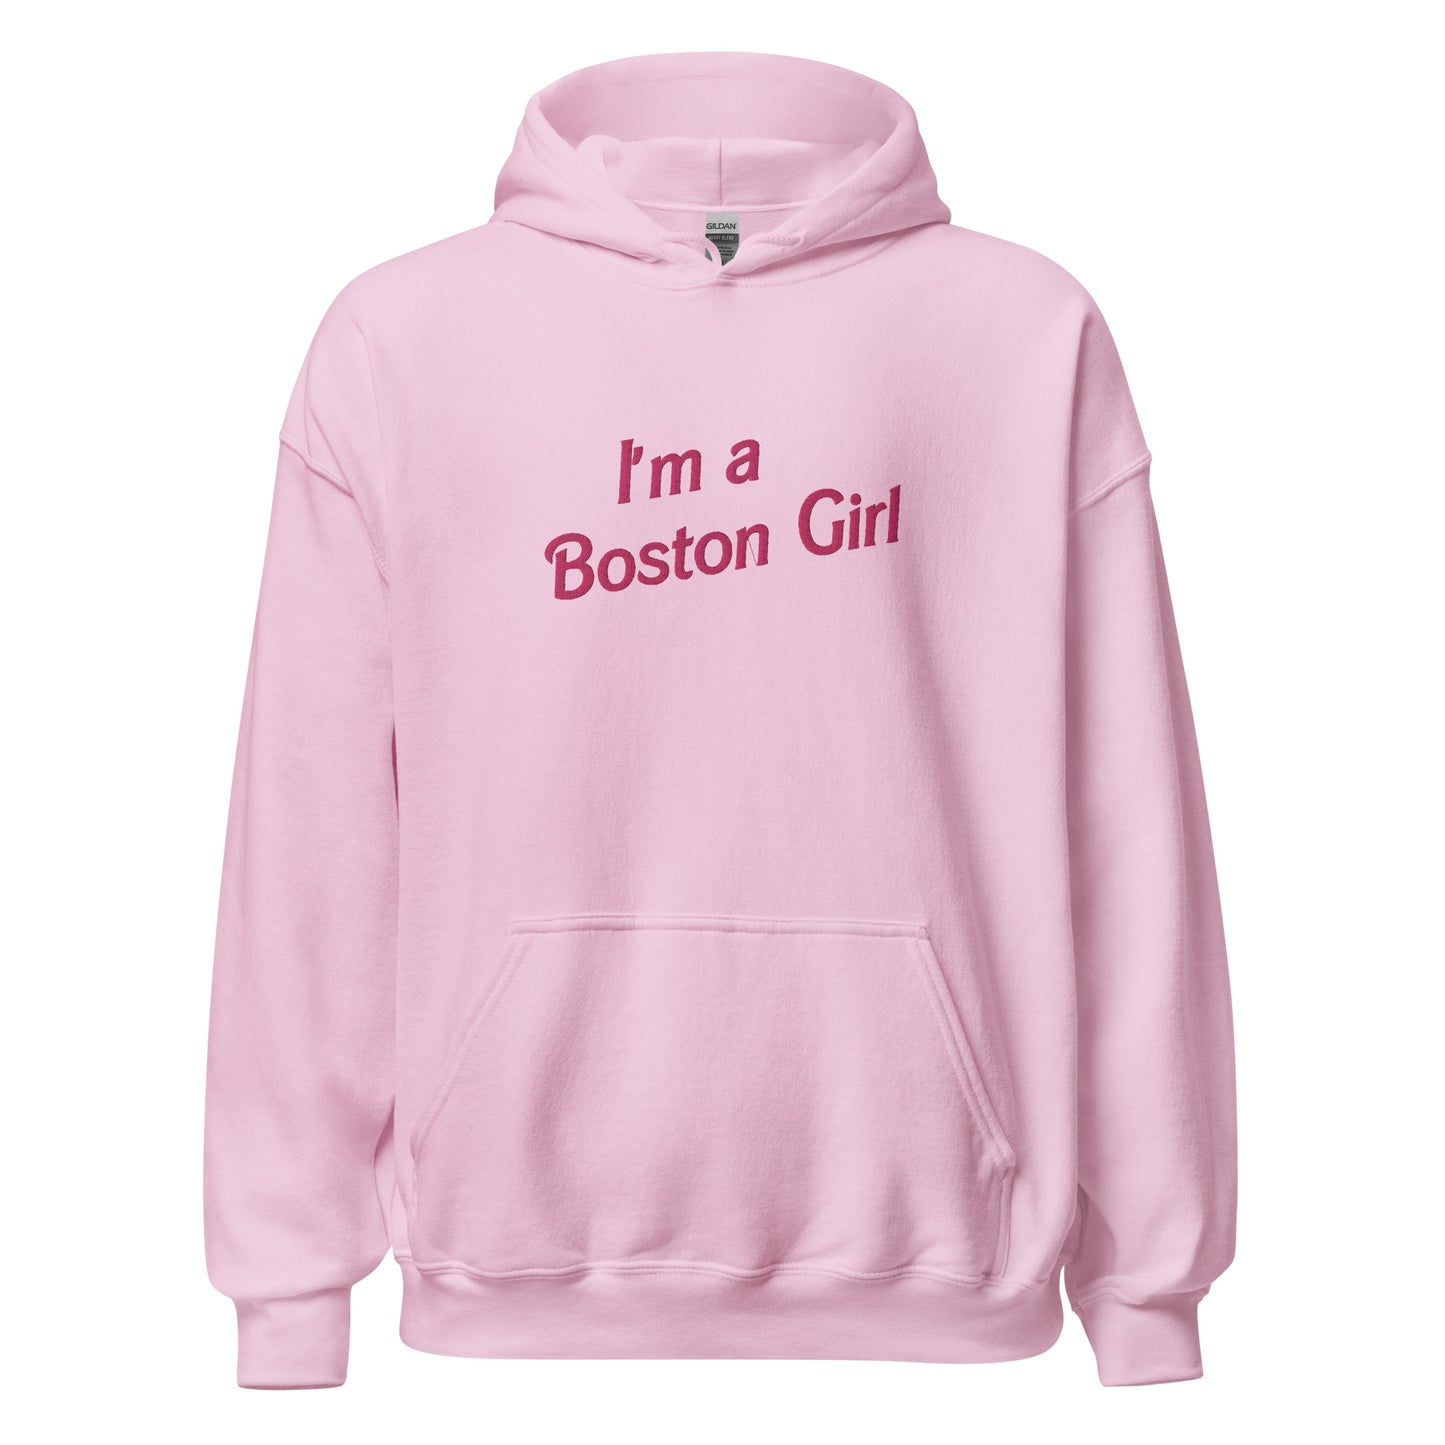 I'm a Boston Girl Embroidered Hoodie